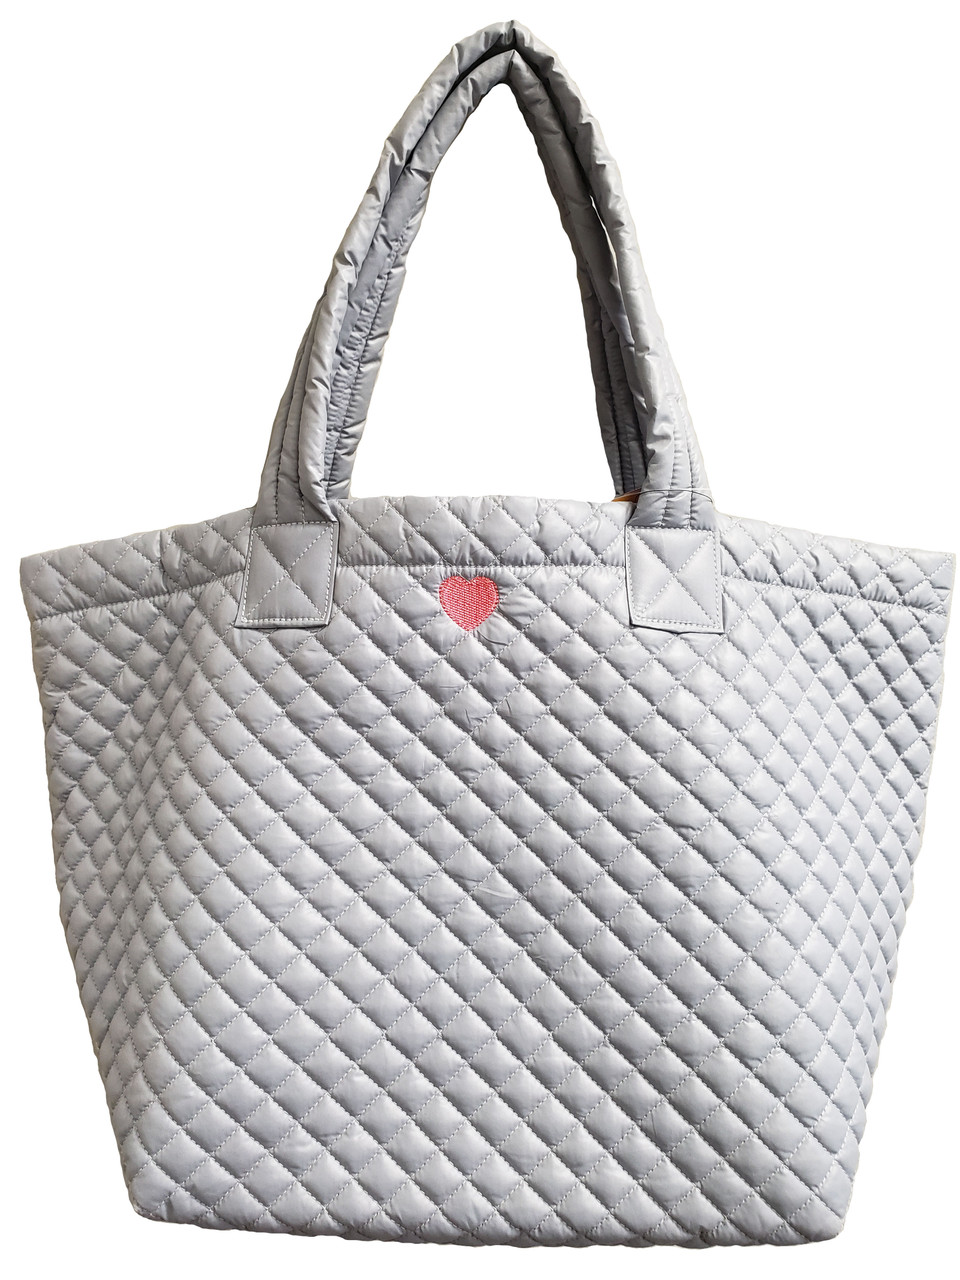 The best bag of 2021 is this ultra-lightweight quilted tote